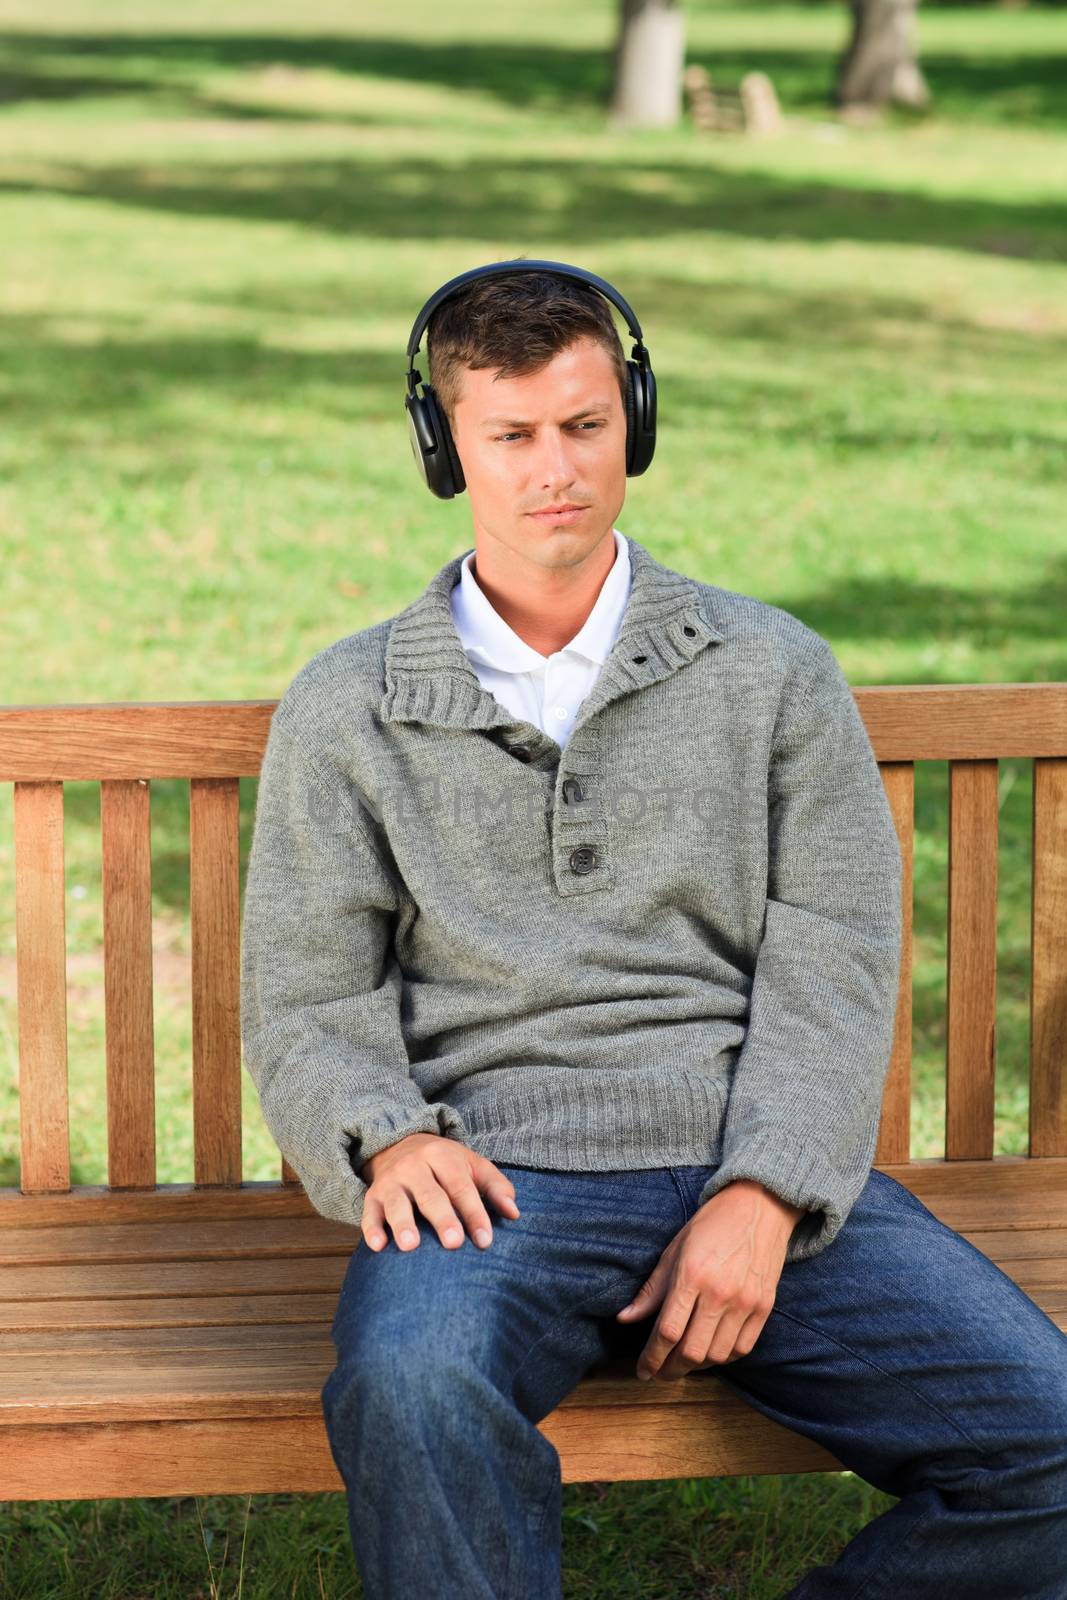 Relaxed man listening to some music during the summer